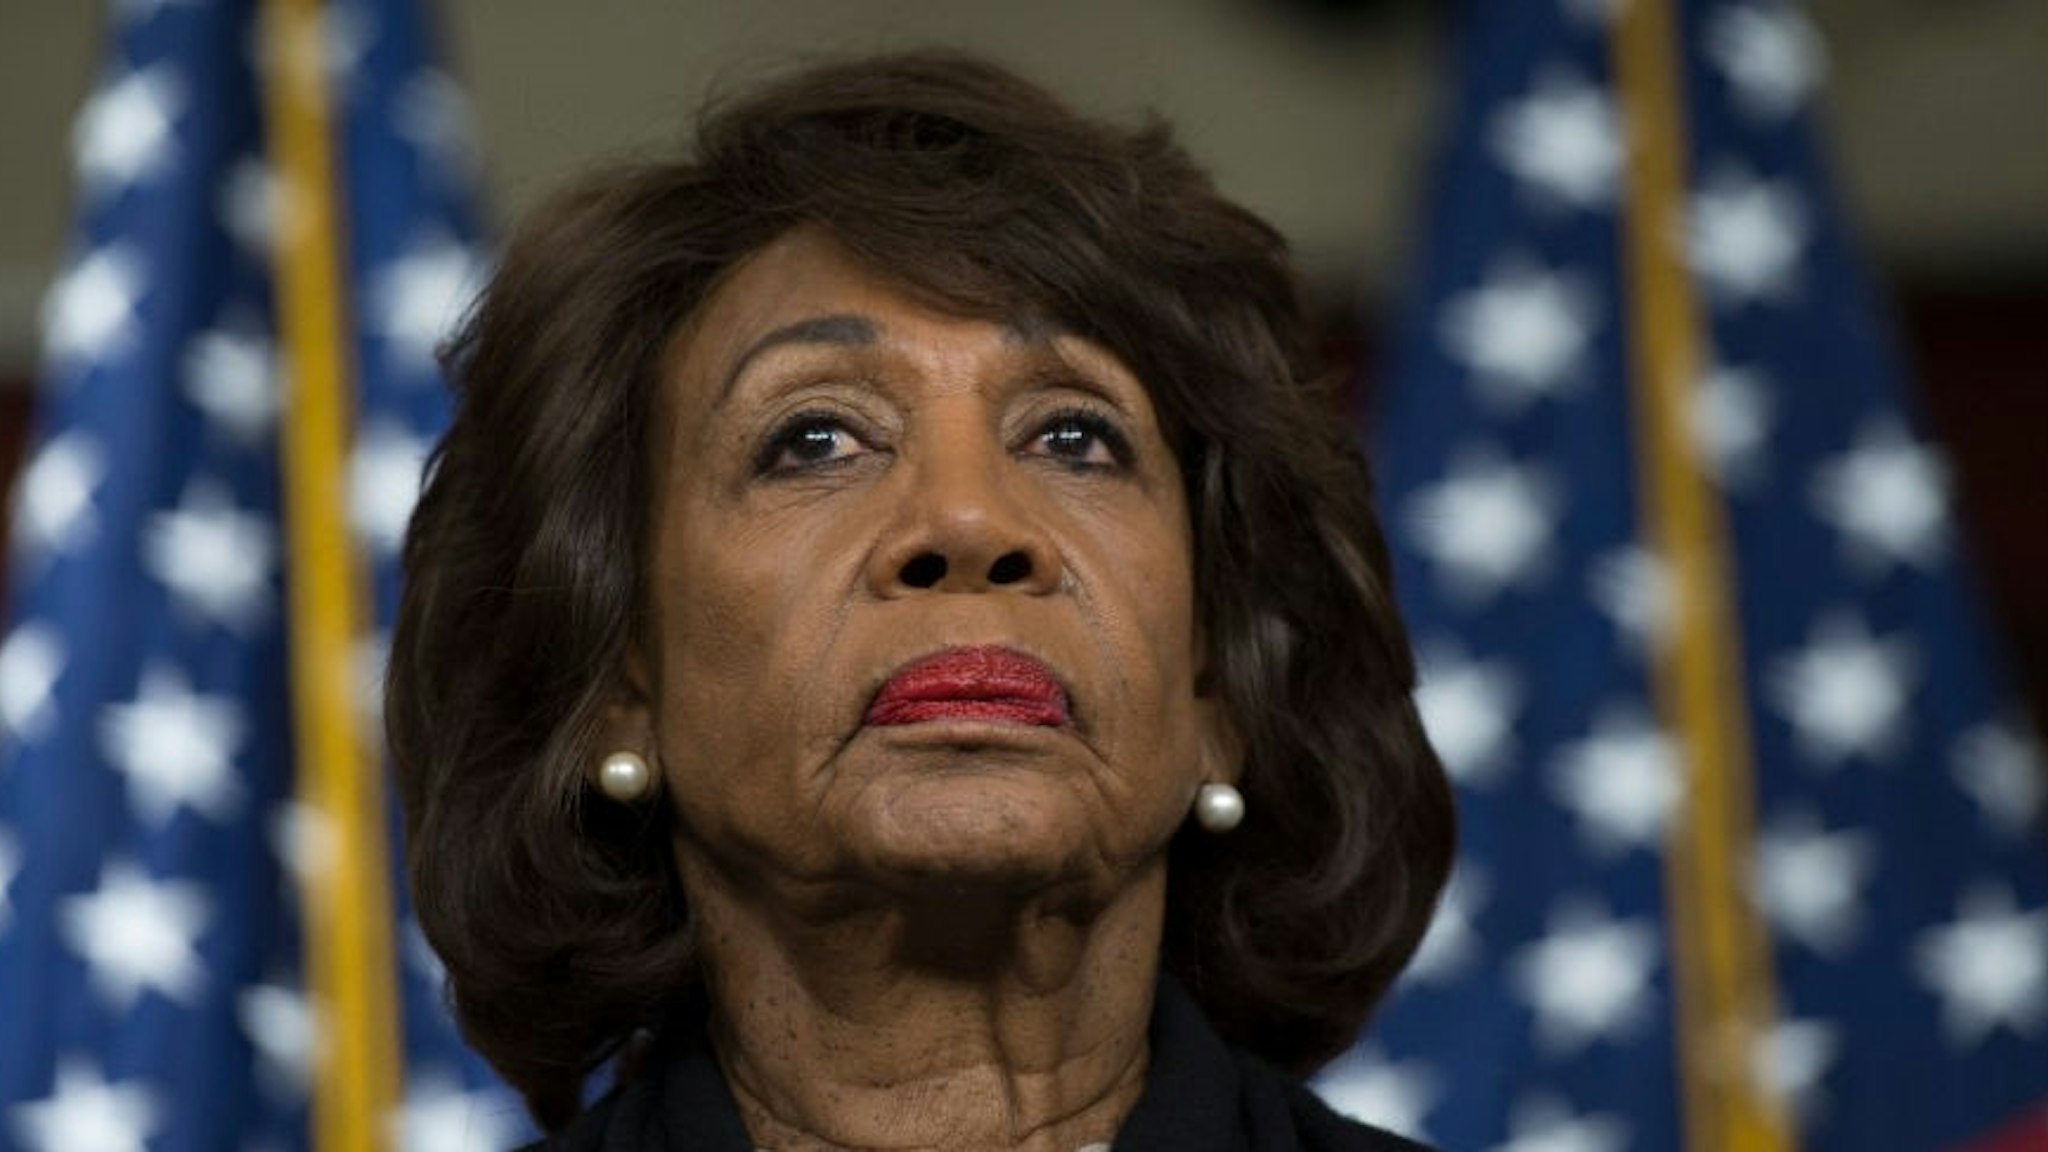 US Representative Maxine Waters (D-CA) looks on before speaking to reports regarding the Russia investigation on Capitol Hill in Washington, DC on January 9, 2018